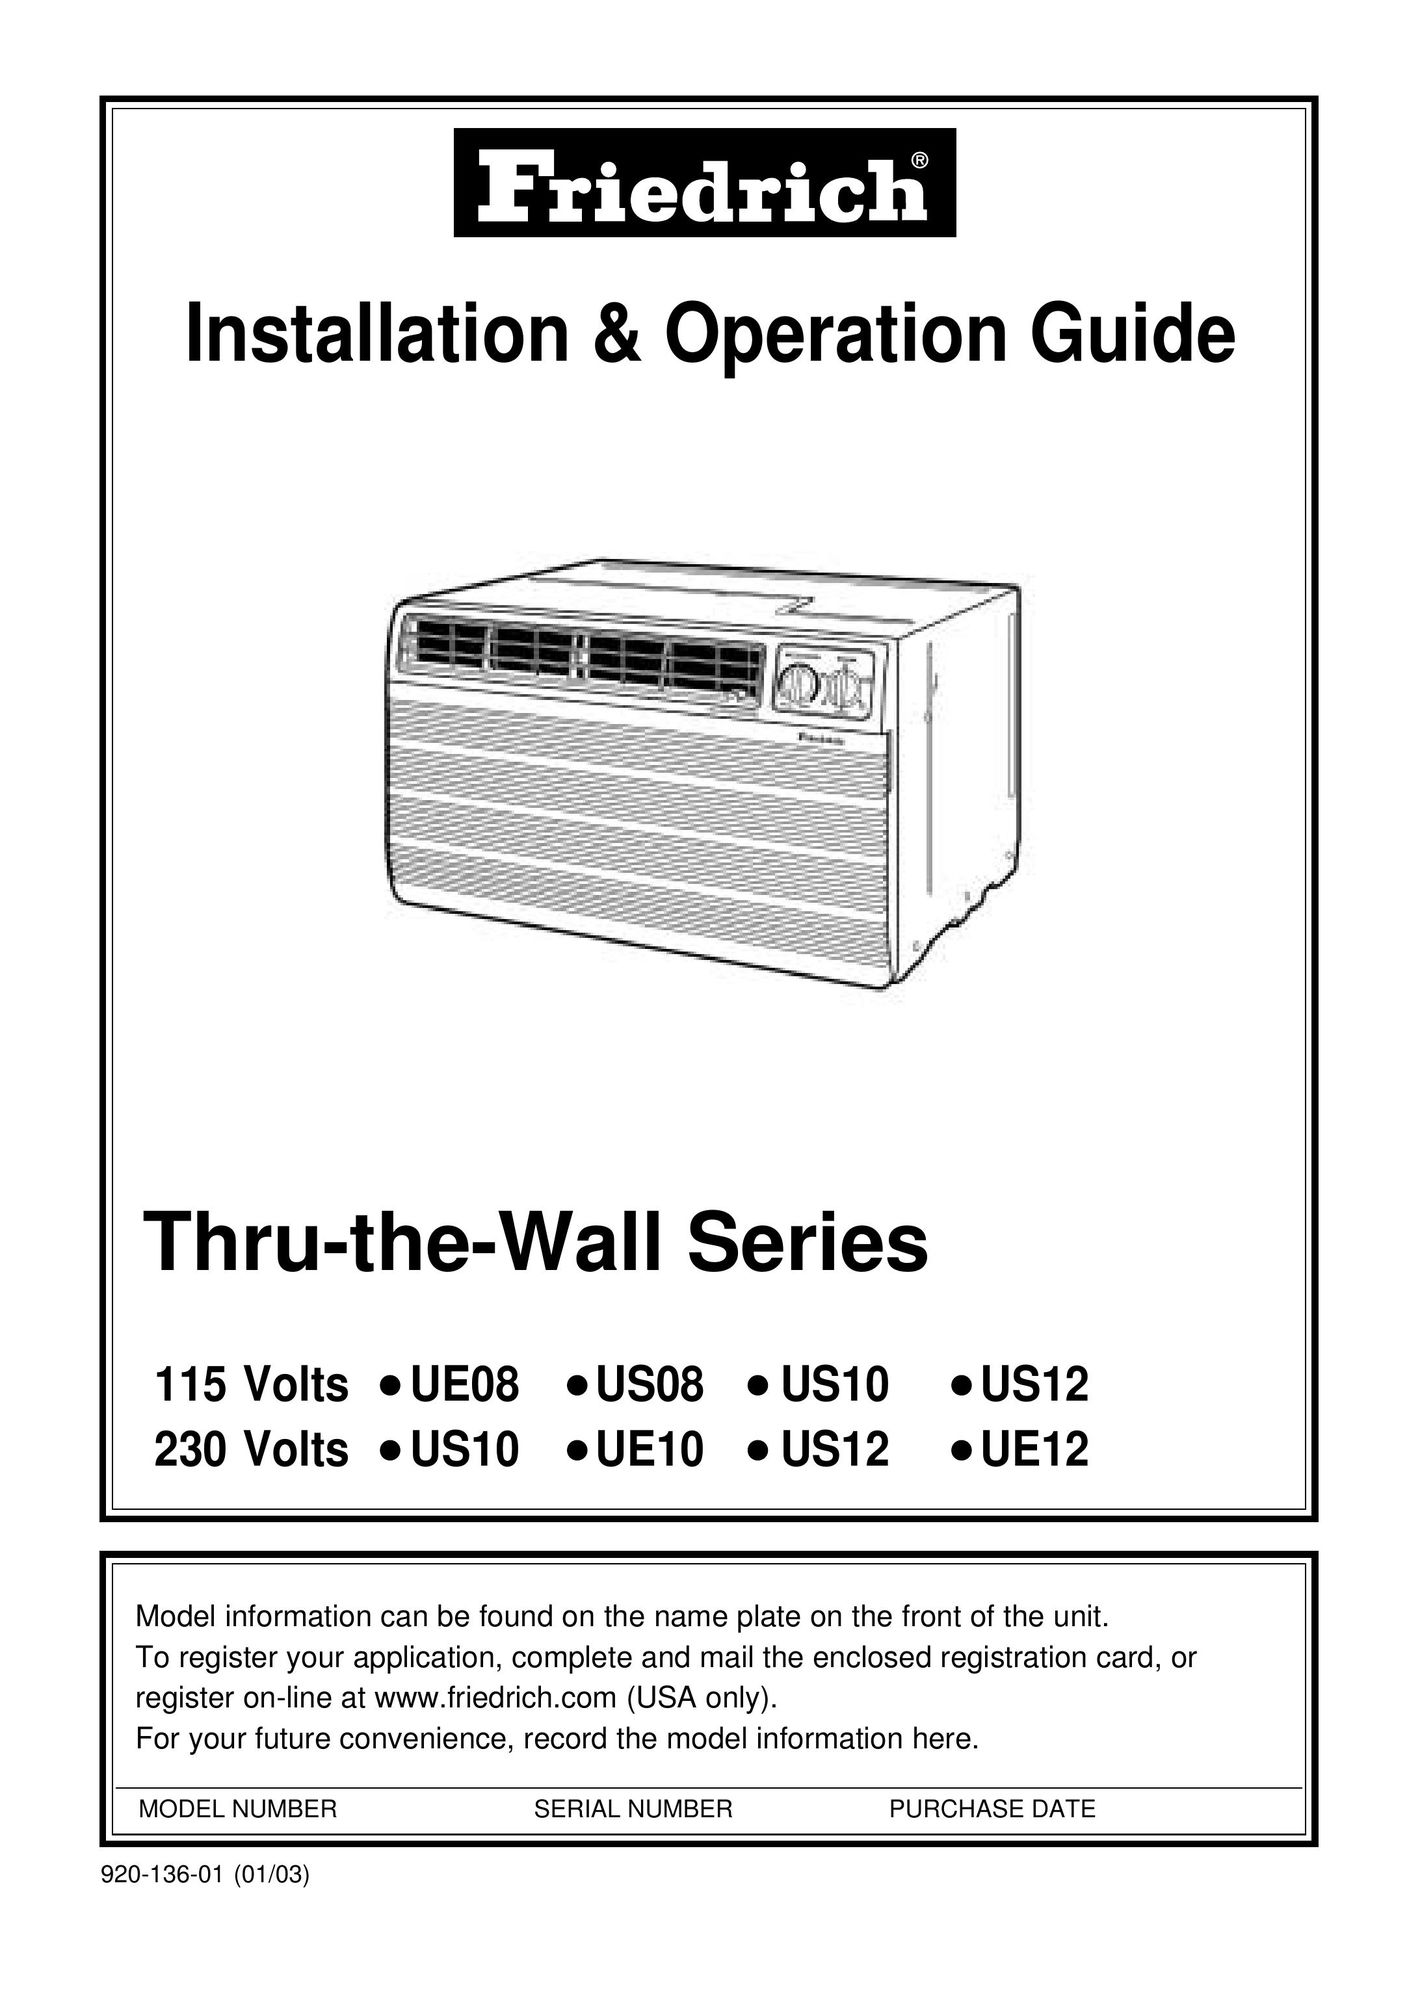 Friedrich 115 Volts US08 Air Conditioner User Manual